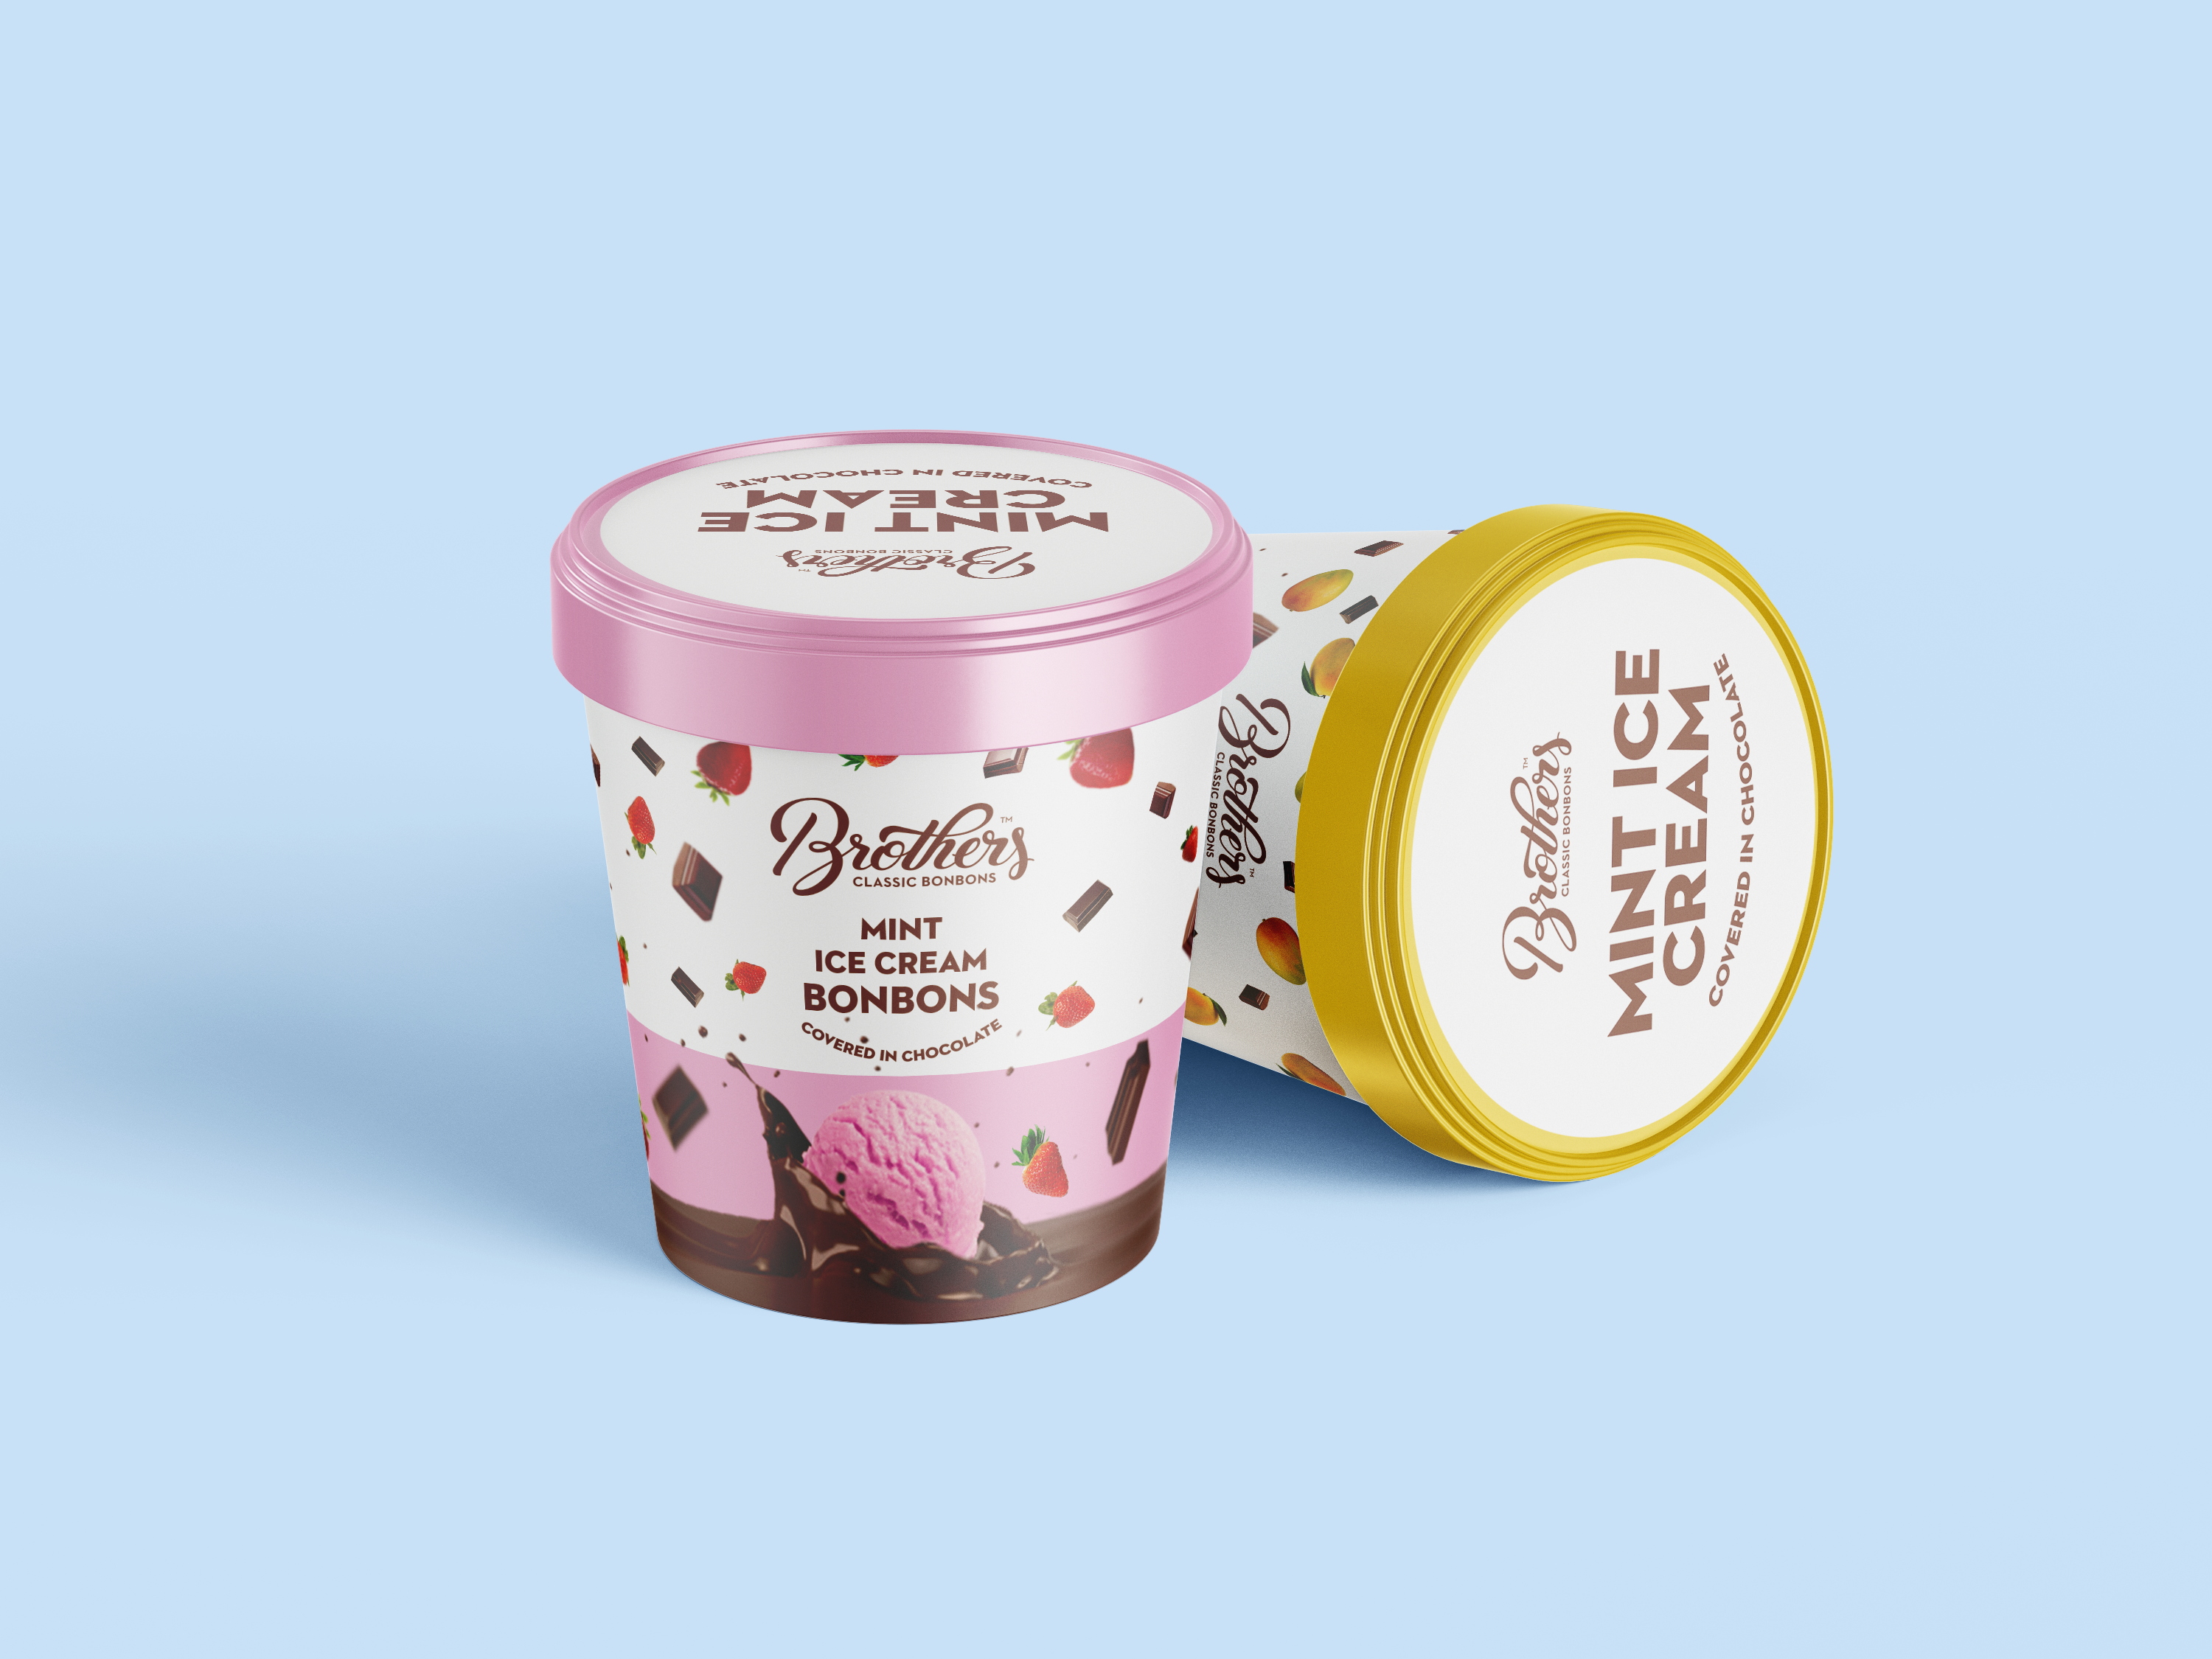 Brothers Ice Cream Packaging Design